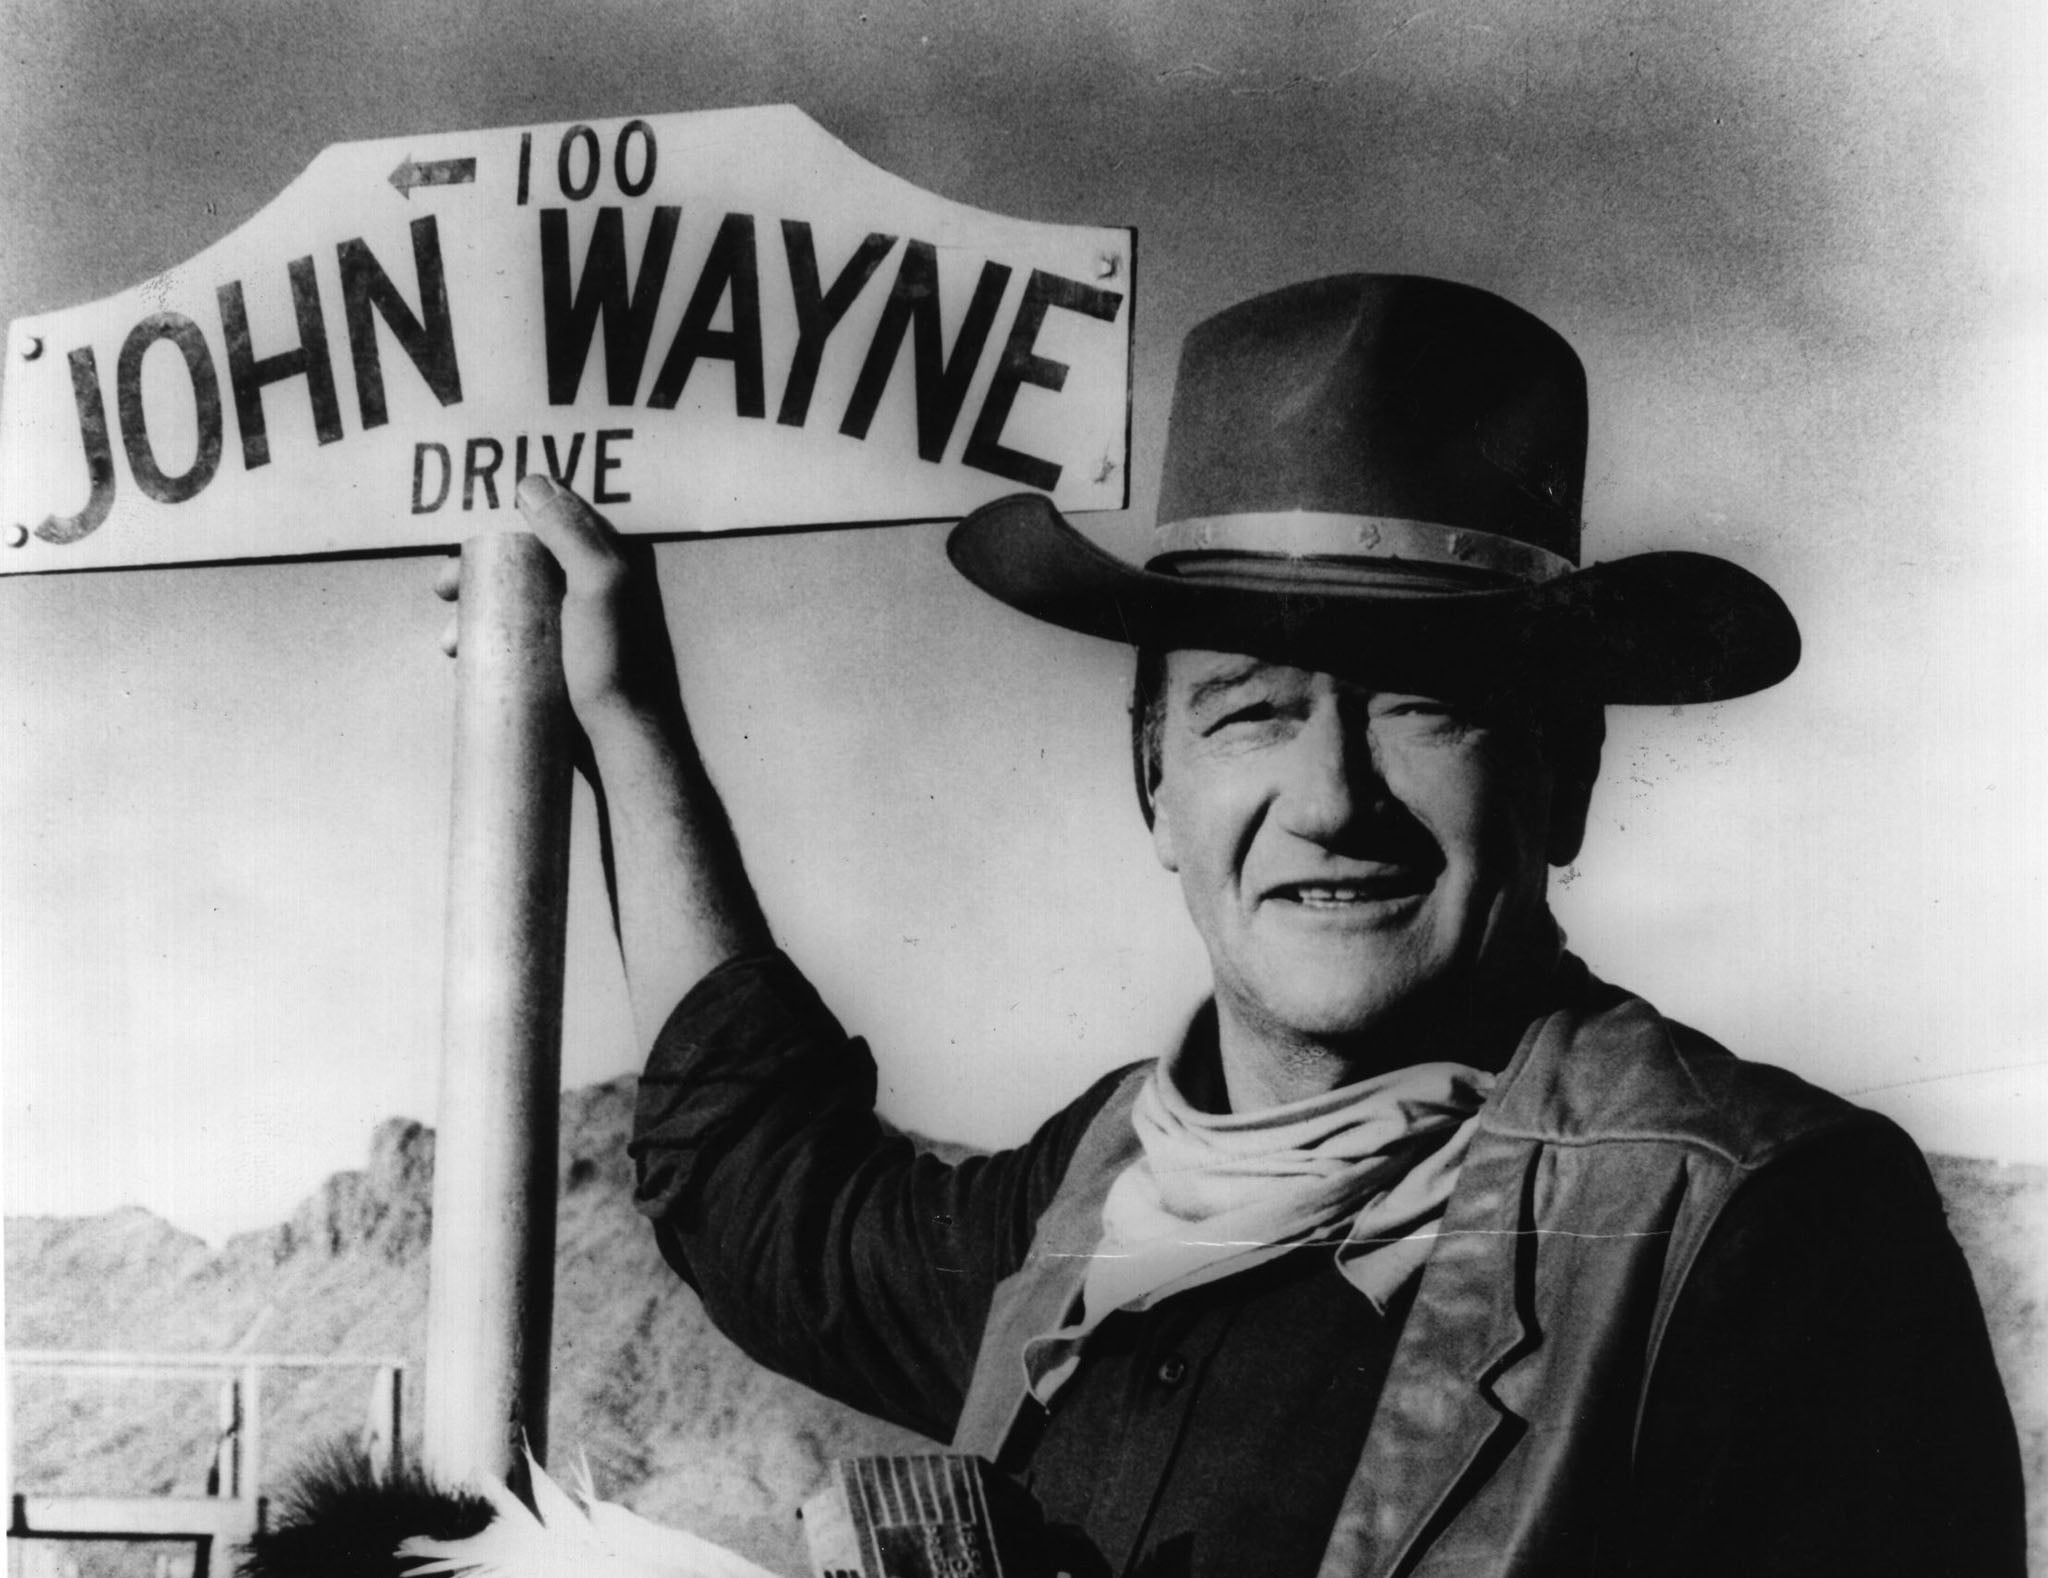 The late actor John Wayne, who starred in several Andrew V McLaglen films, with his sign in 1966